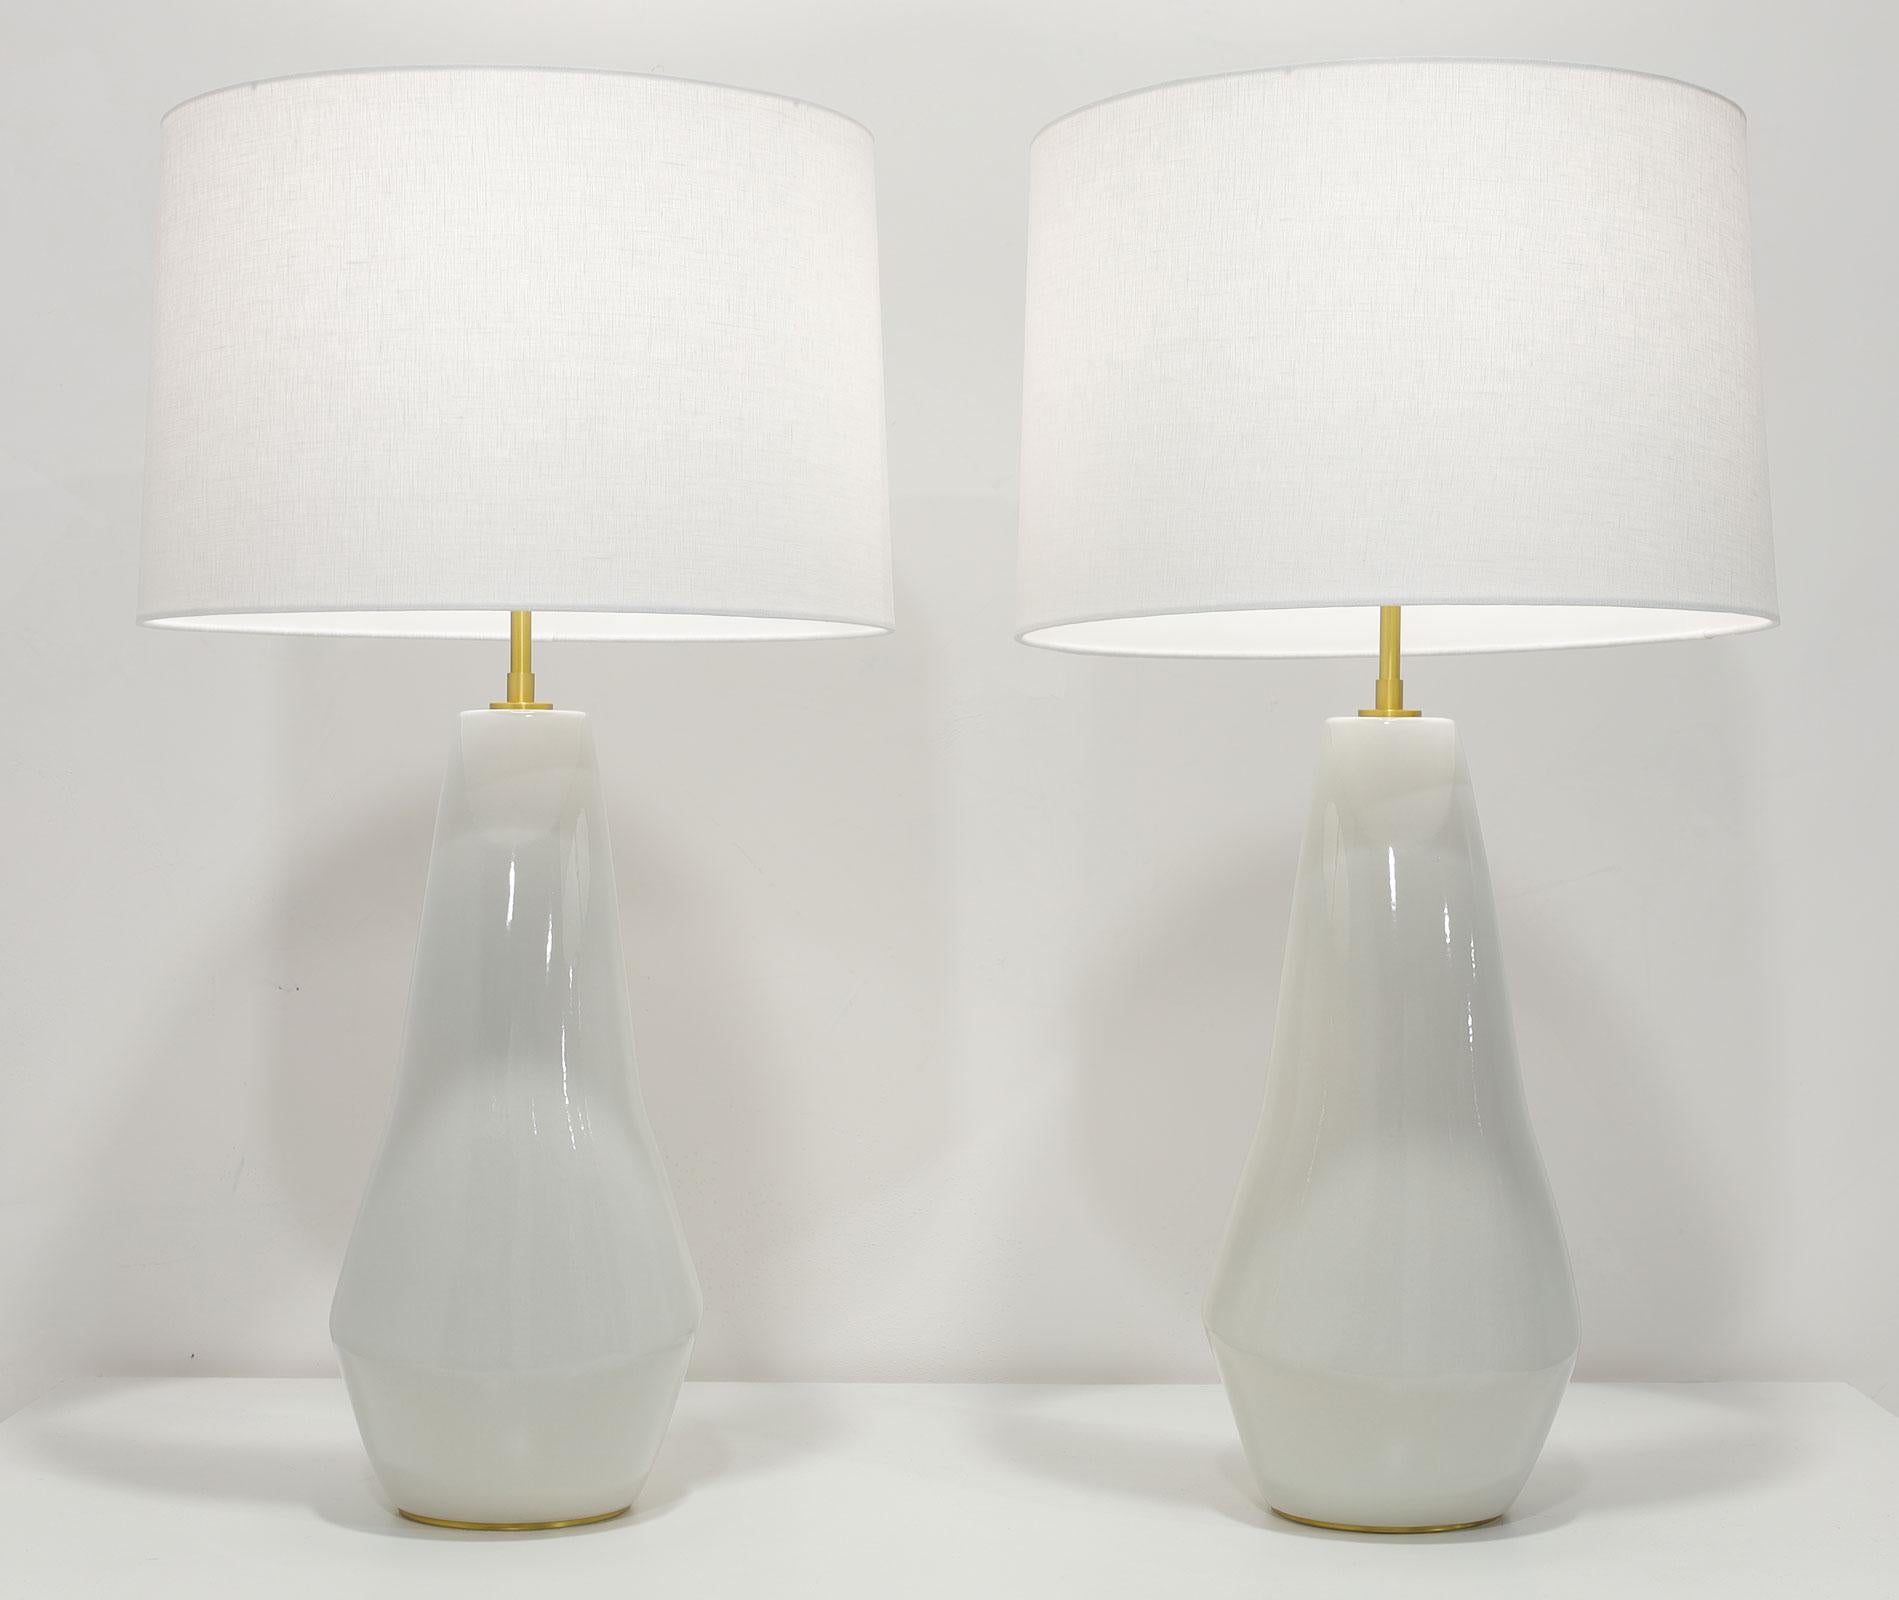 Contemporary Pair of Contour Artic White Ceramic Table Lamps by Kelly Wearstler For Sale